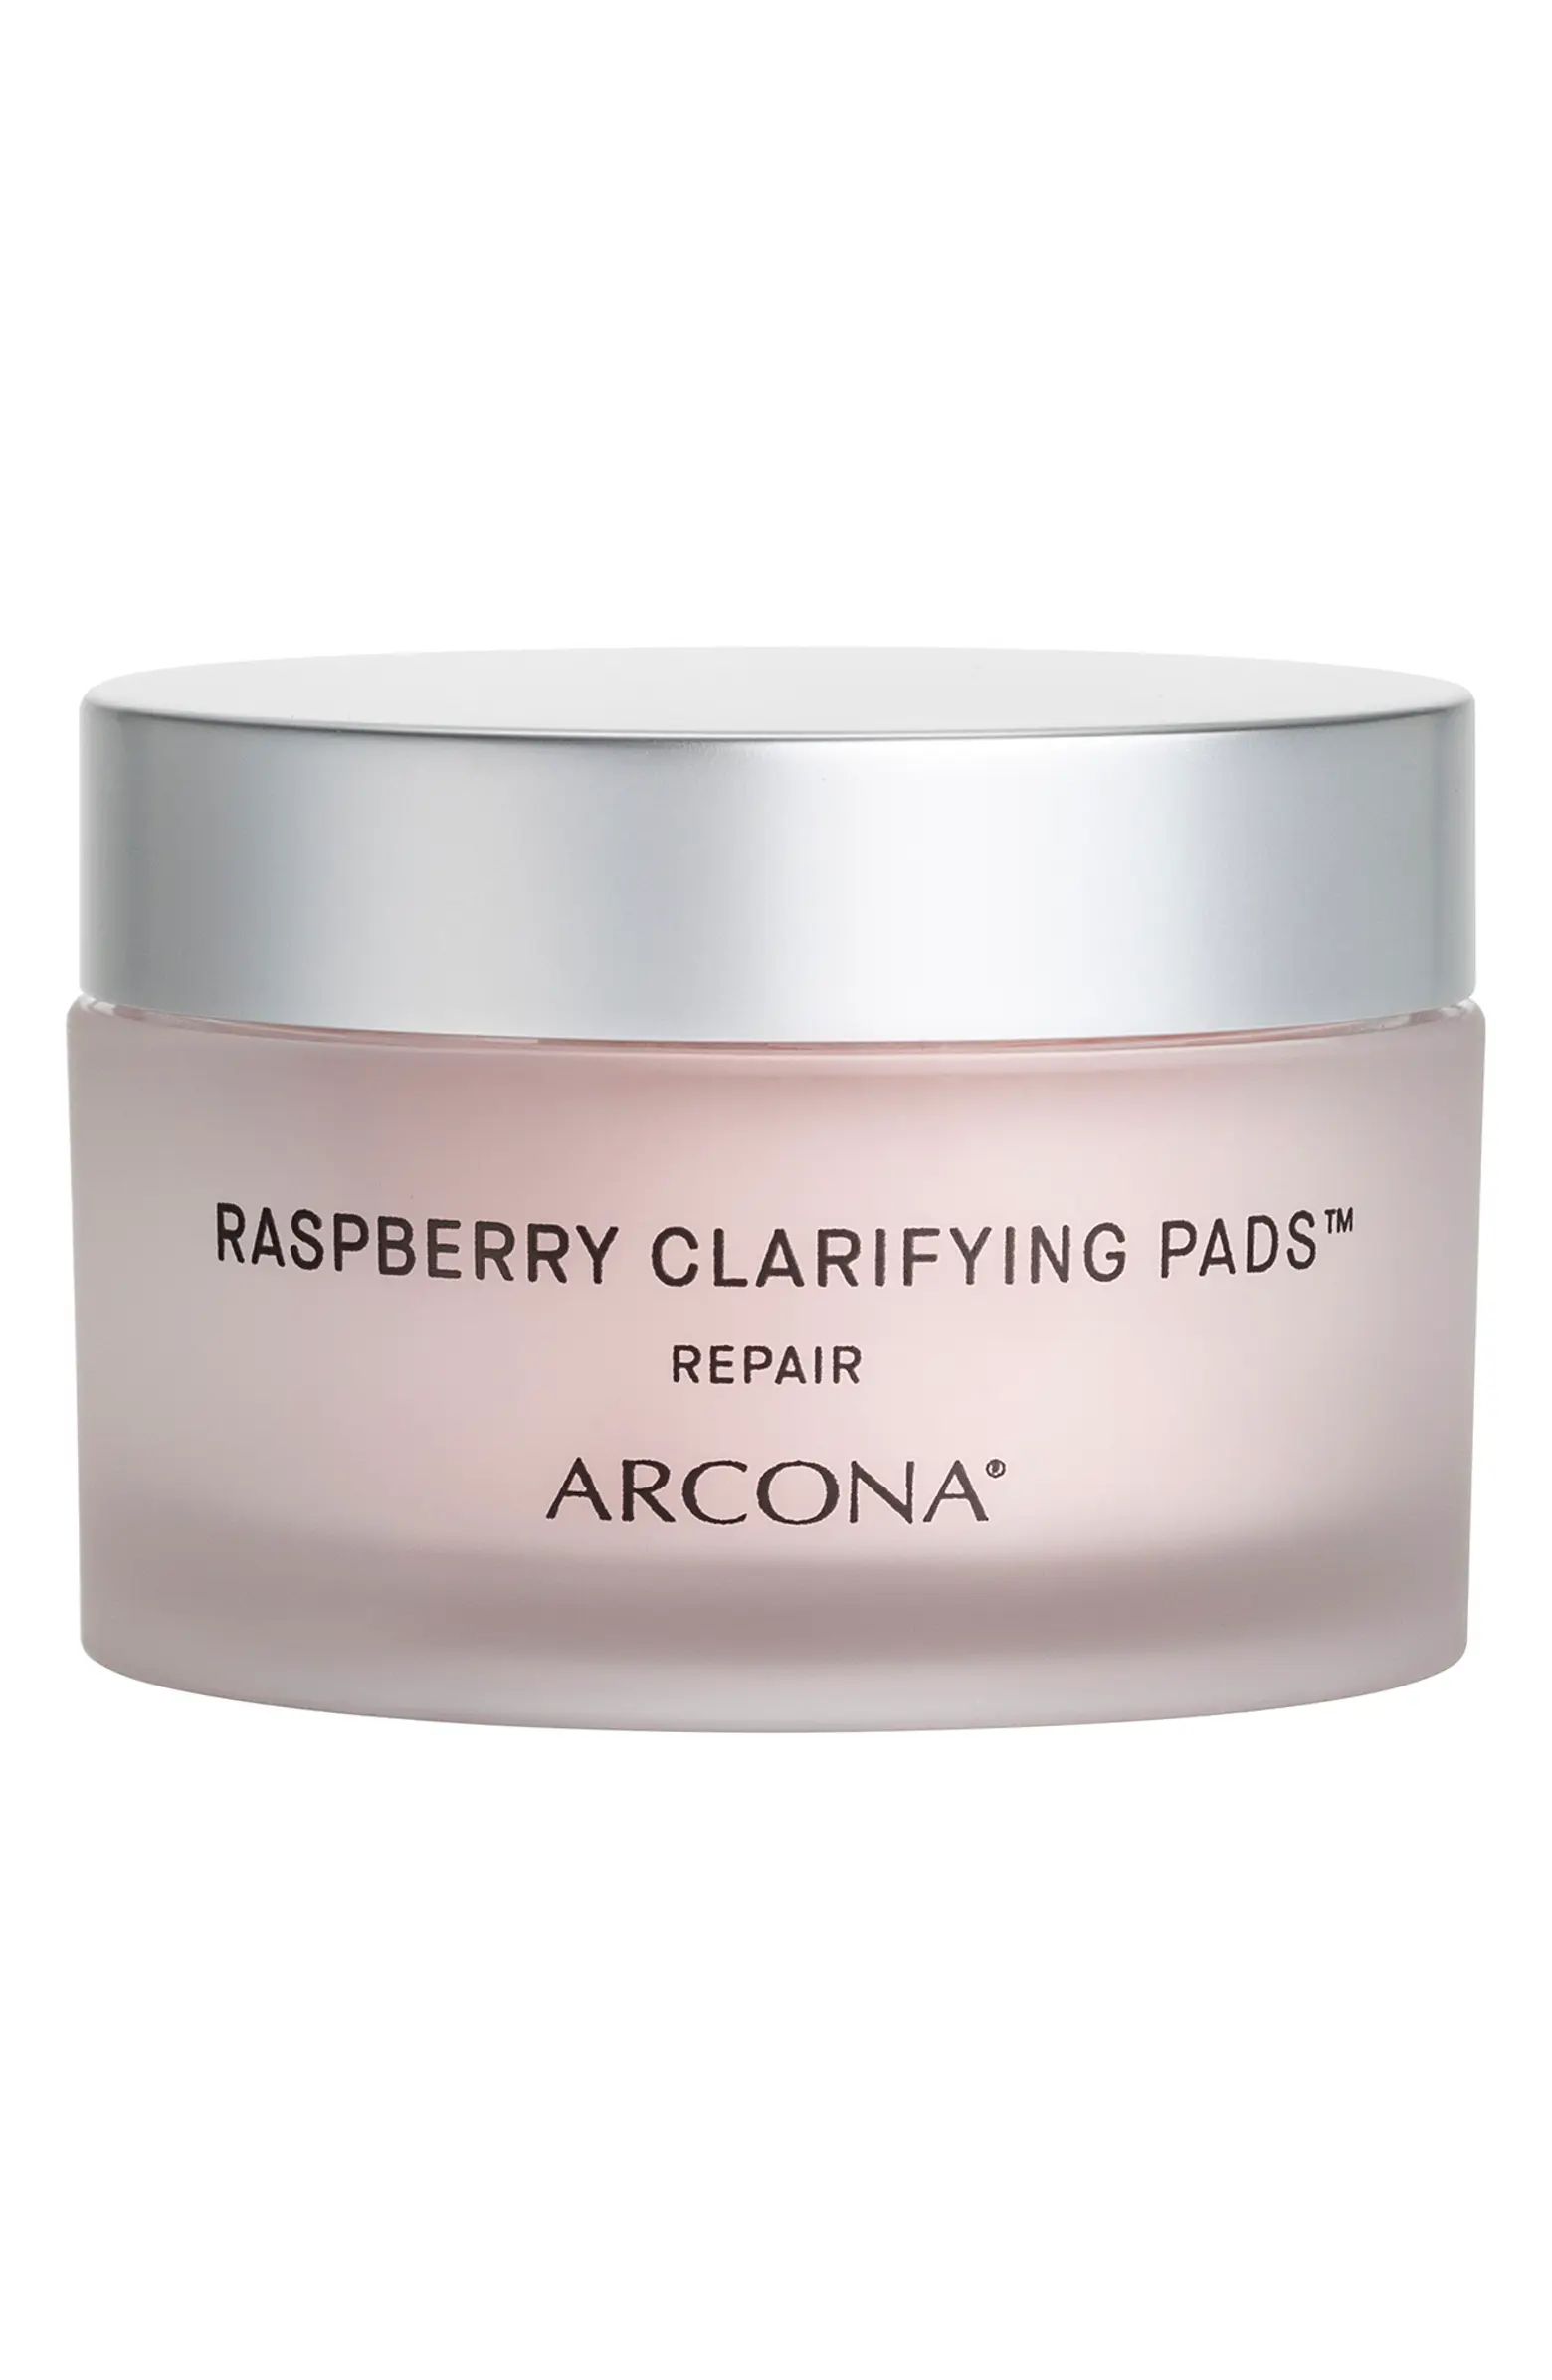 Raspberry Clarifying Pads Blemish Reducing Face Toner Pads | Nordstrom